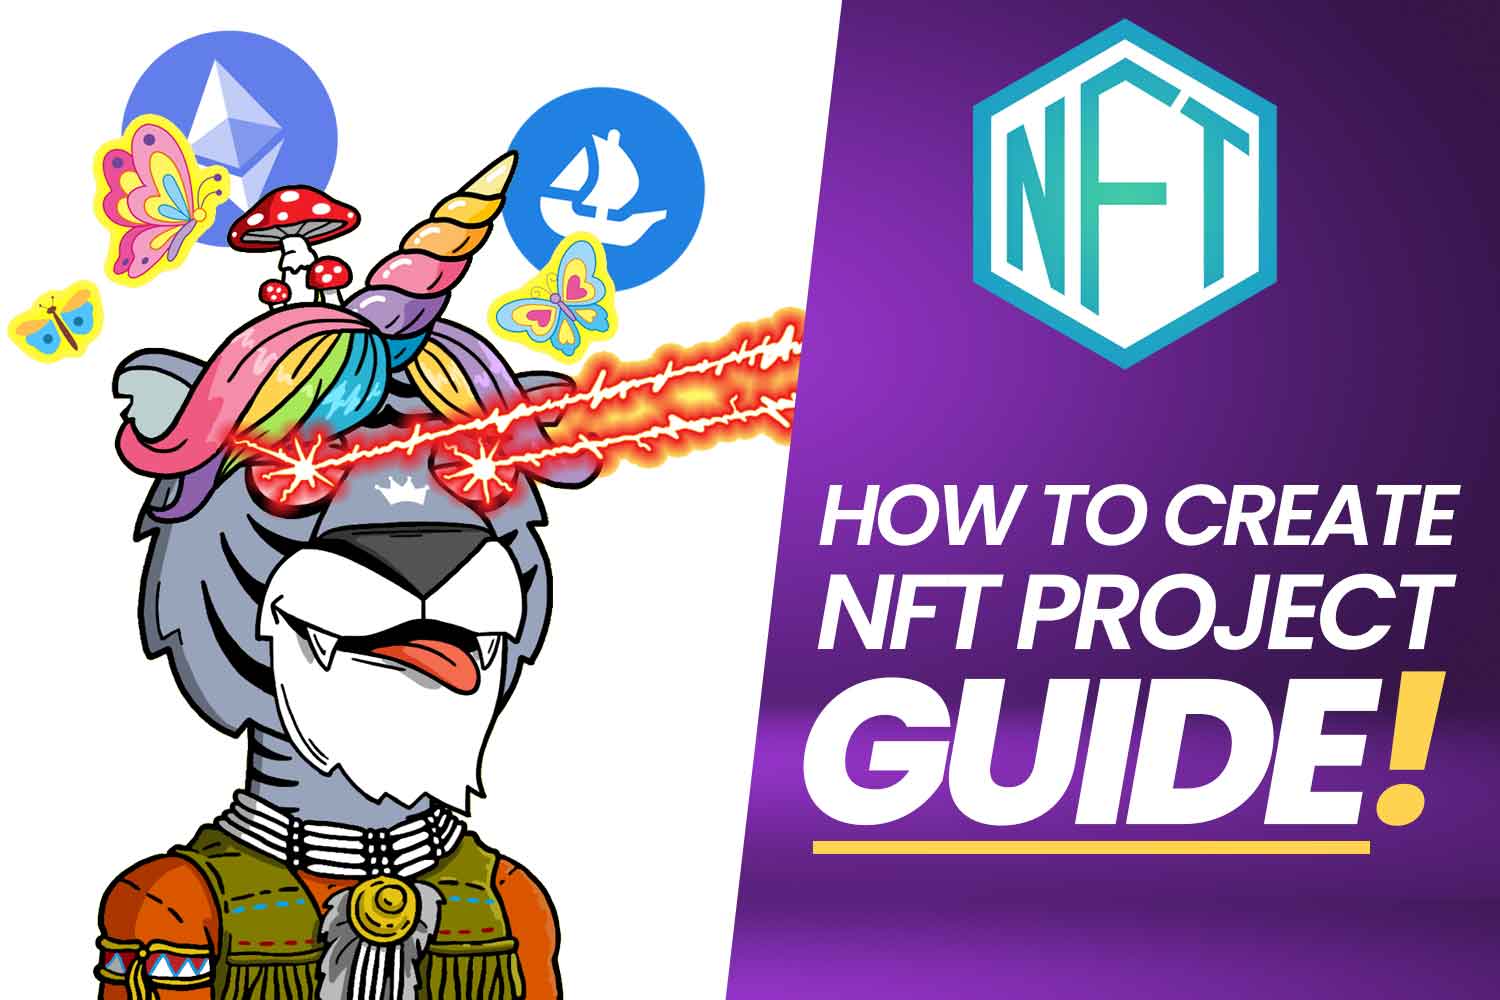 Creating NFT Project Guide